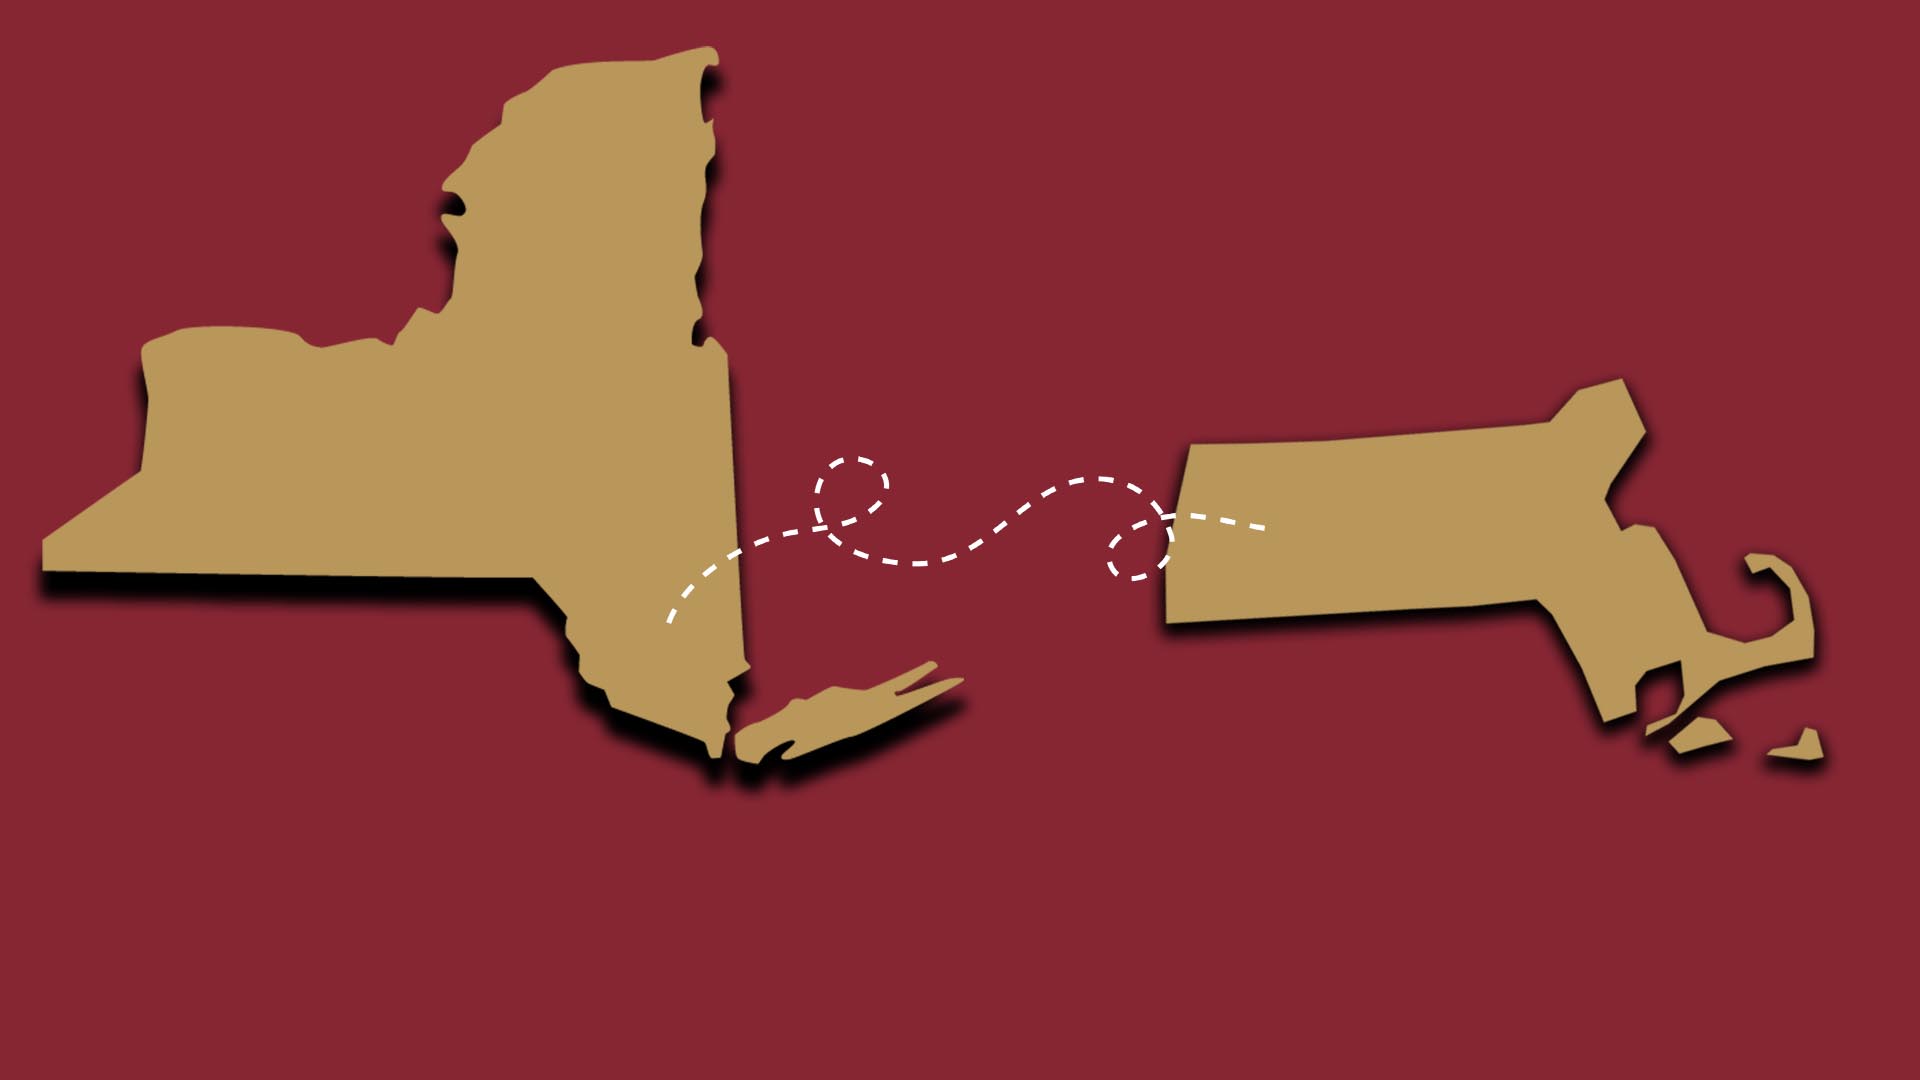 Outlines of the state of NY and MA